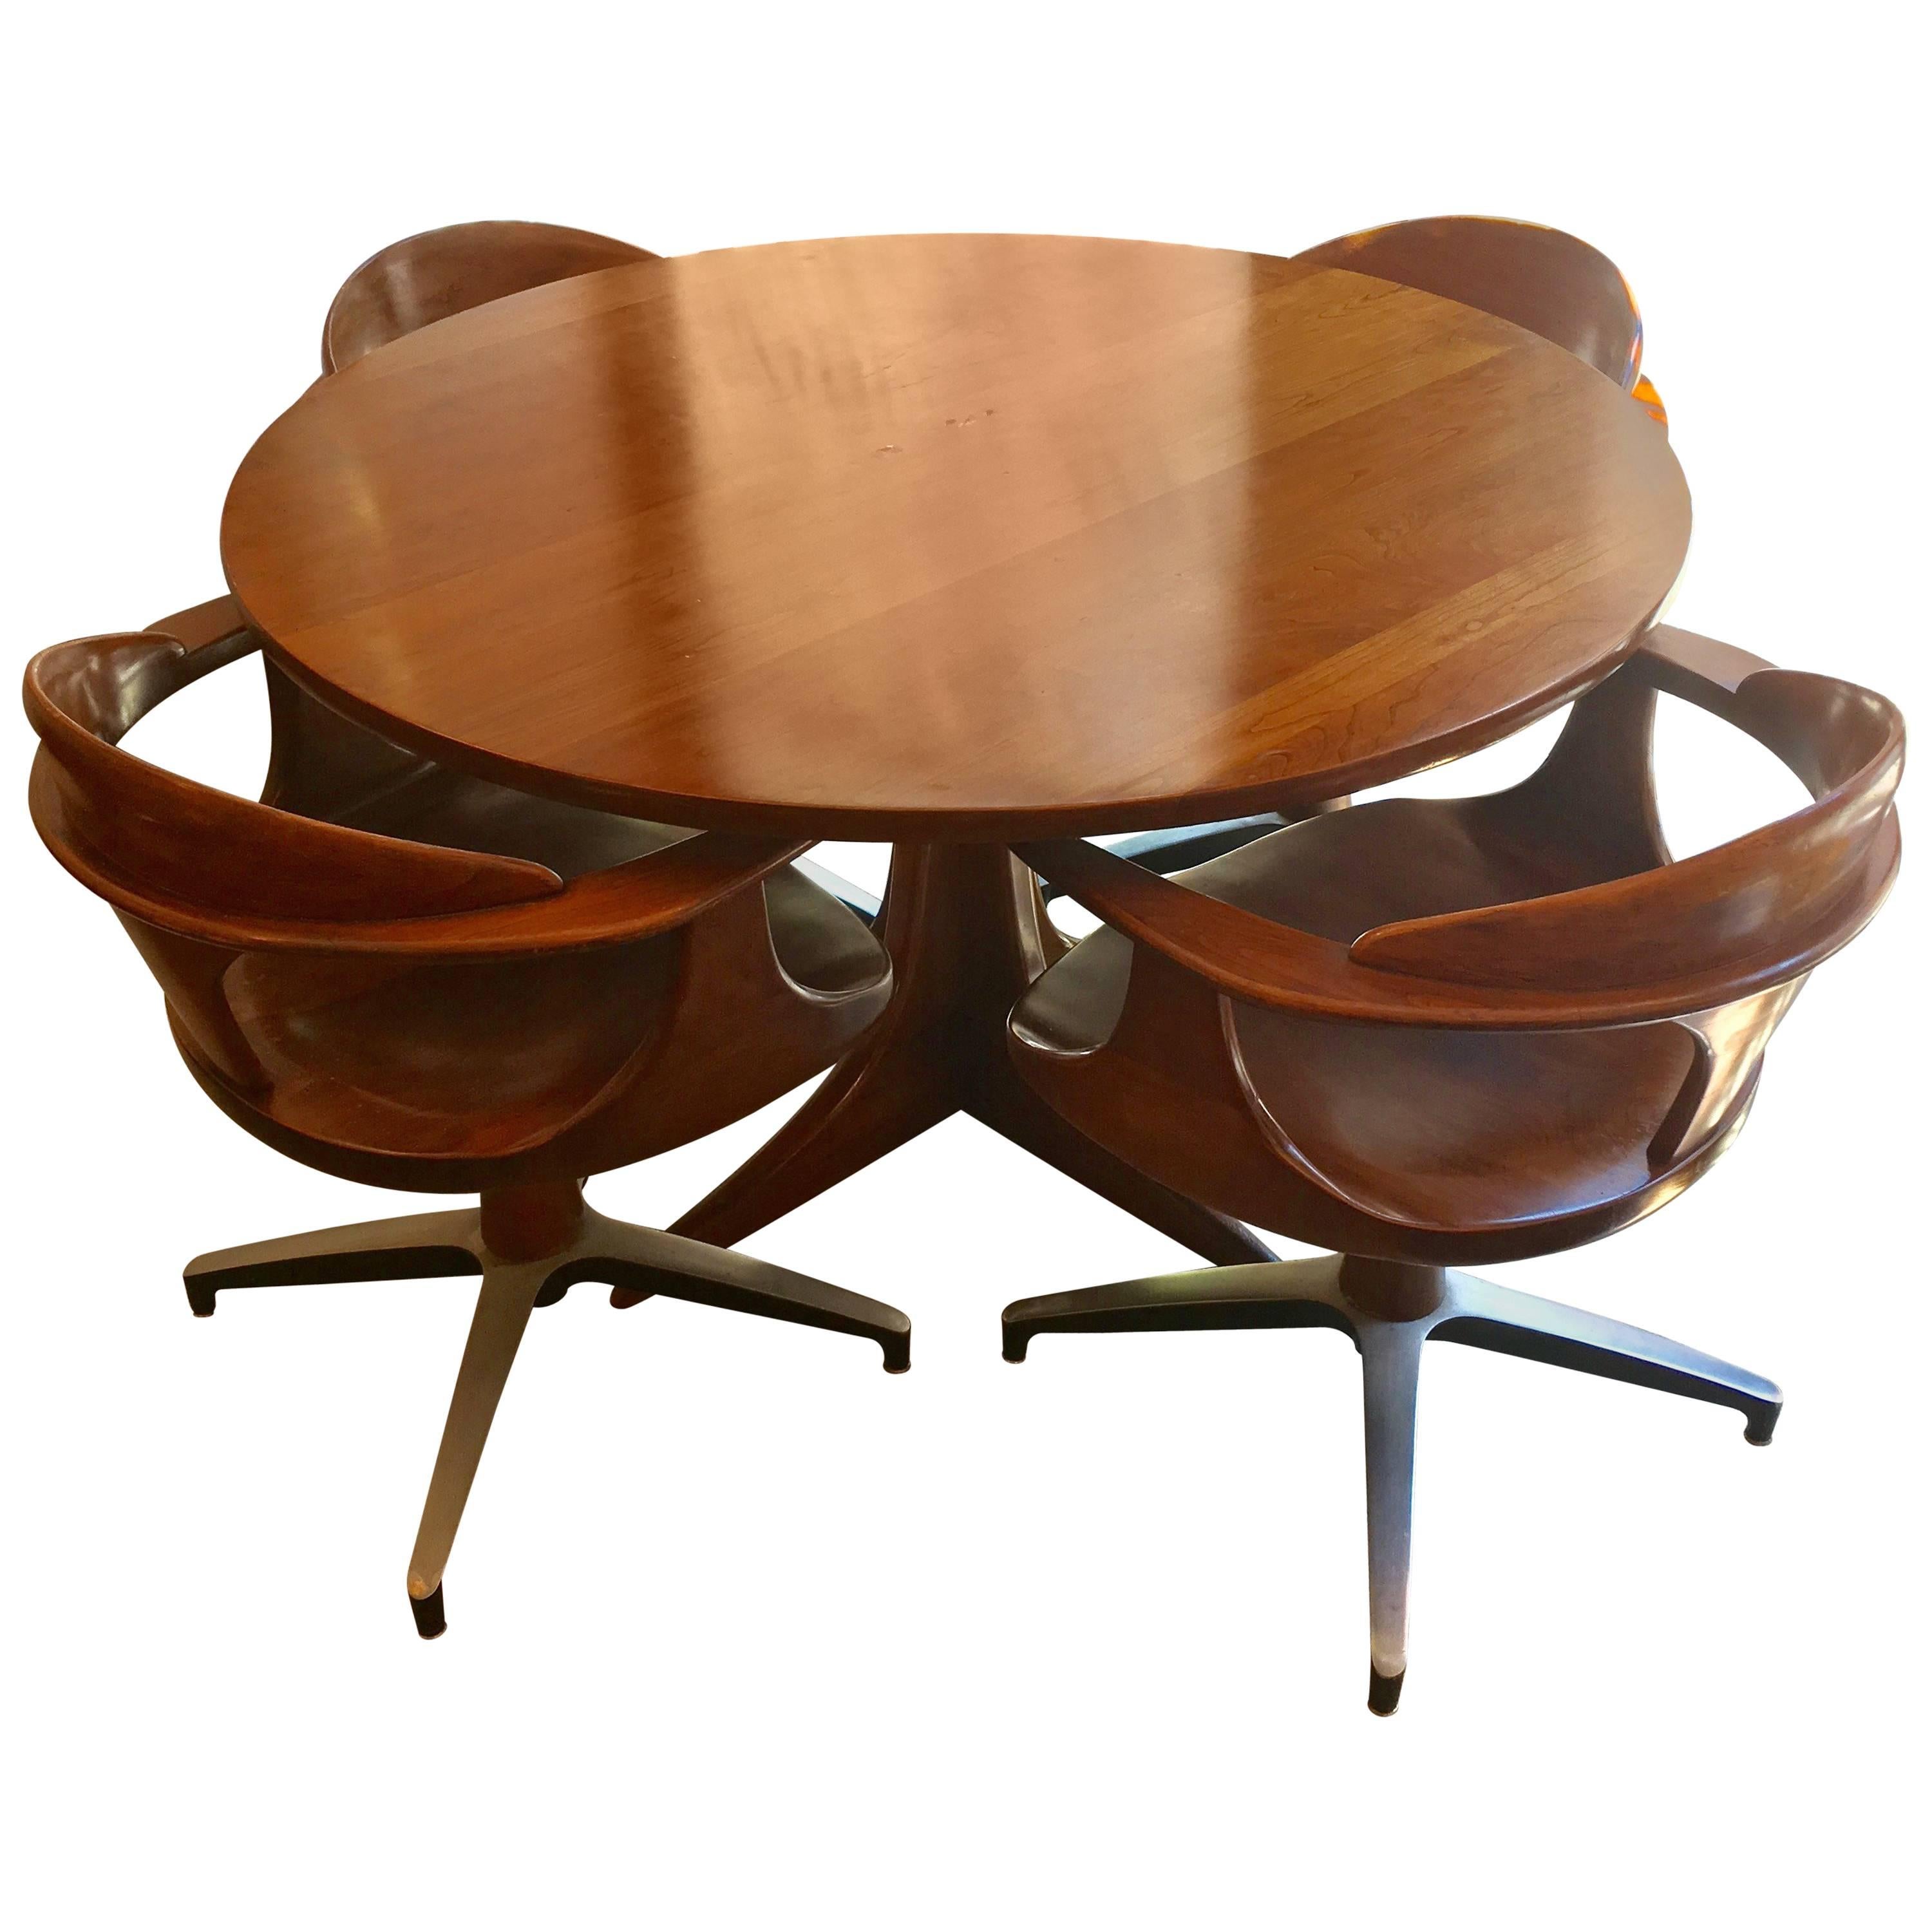 Heywood Wakefield Cliff House American, 1960s Dining Set